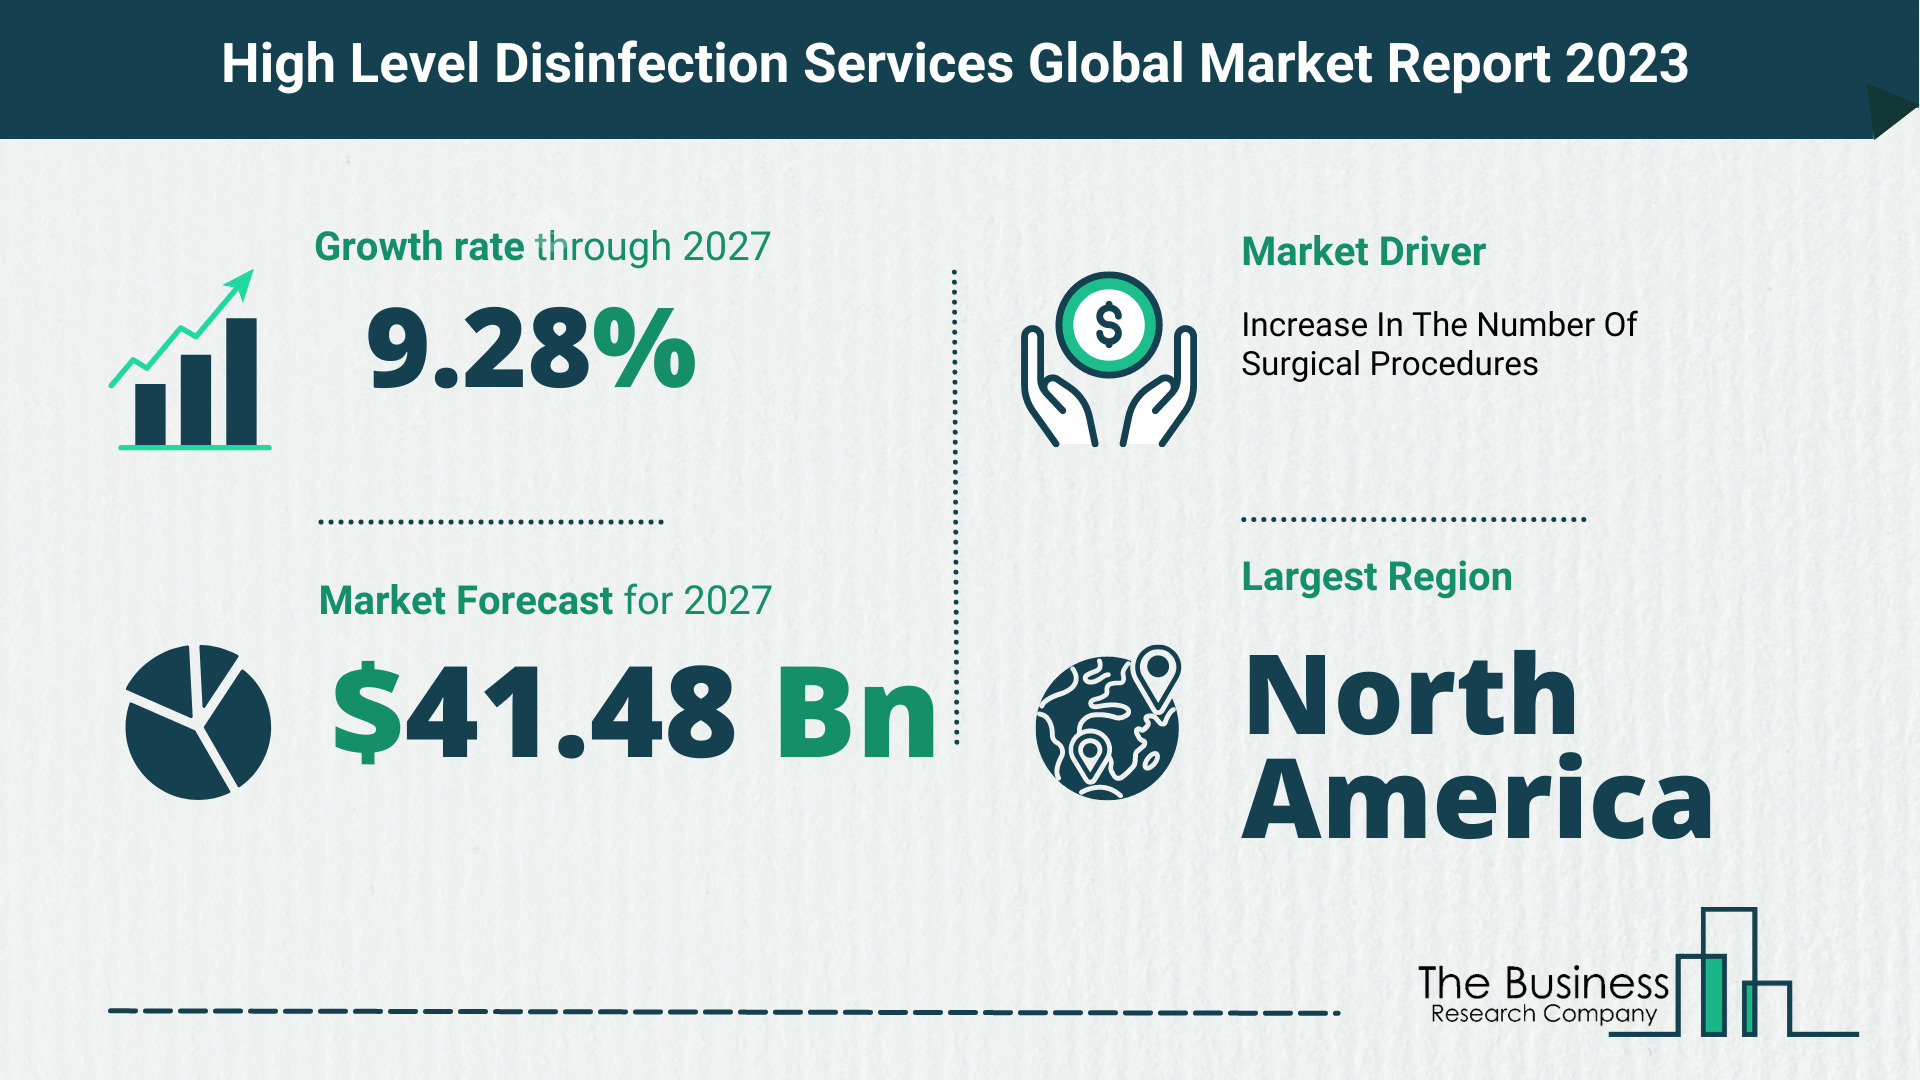 What Will The High Level Disinfection Services Market Look Like In 2023?